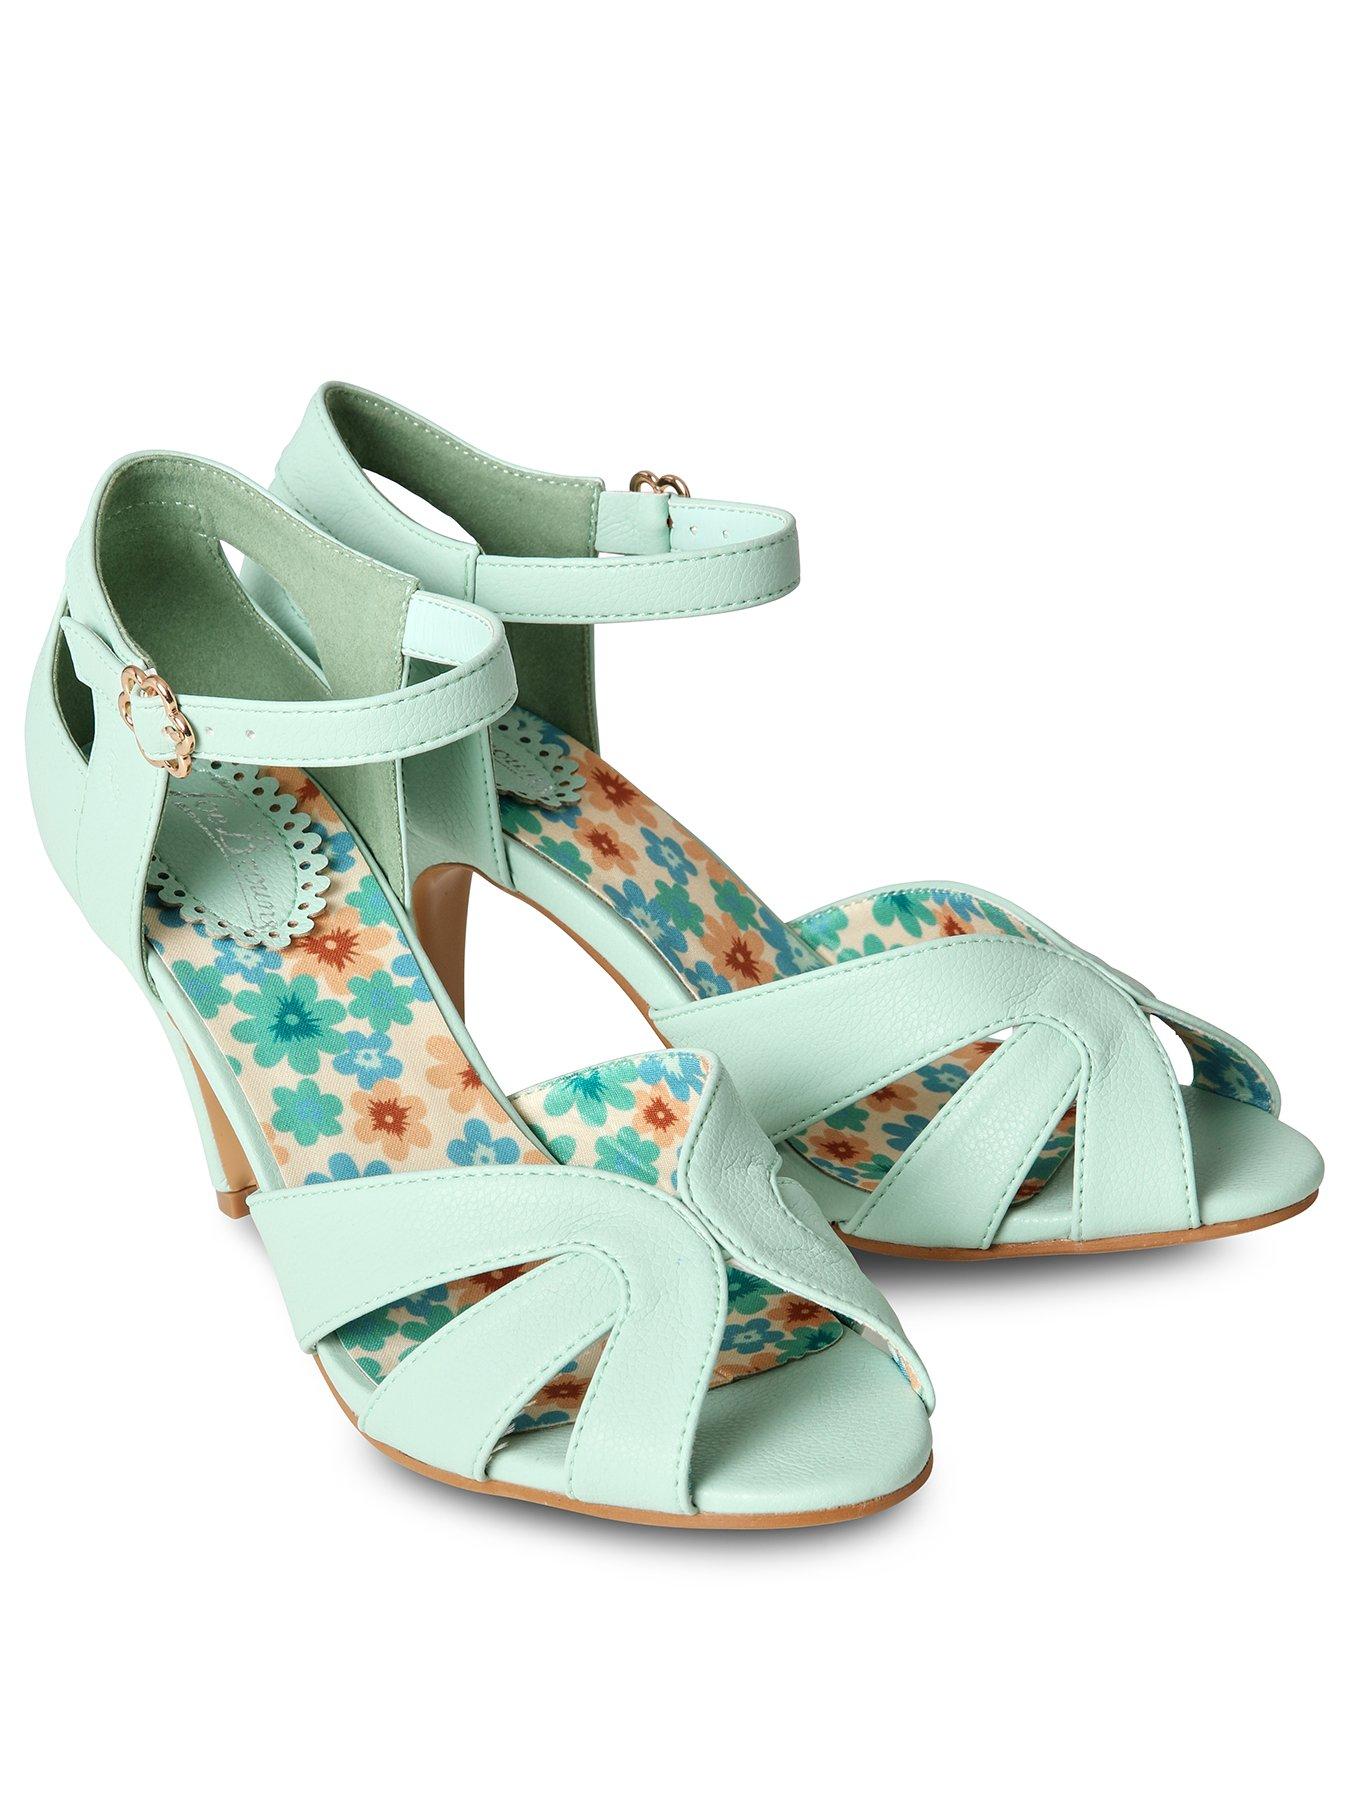  Sweet Polly Heeled Sandals - Sage